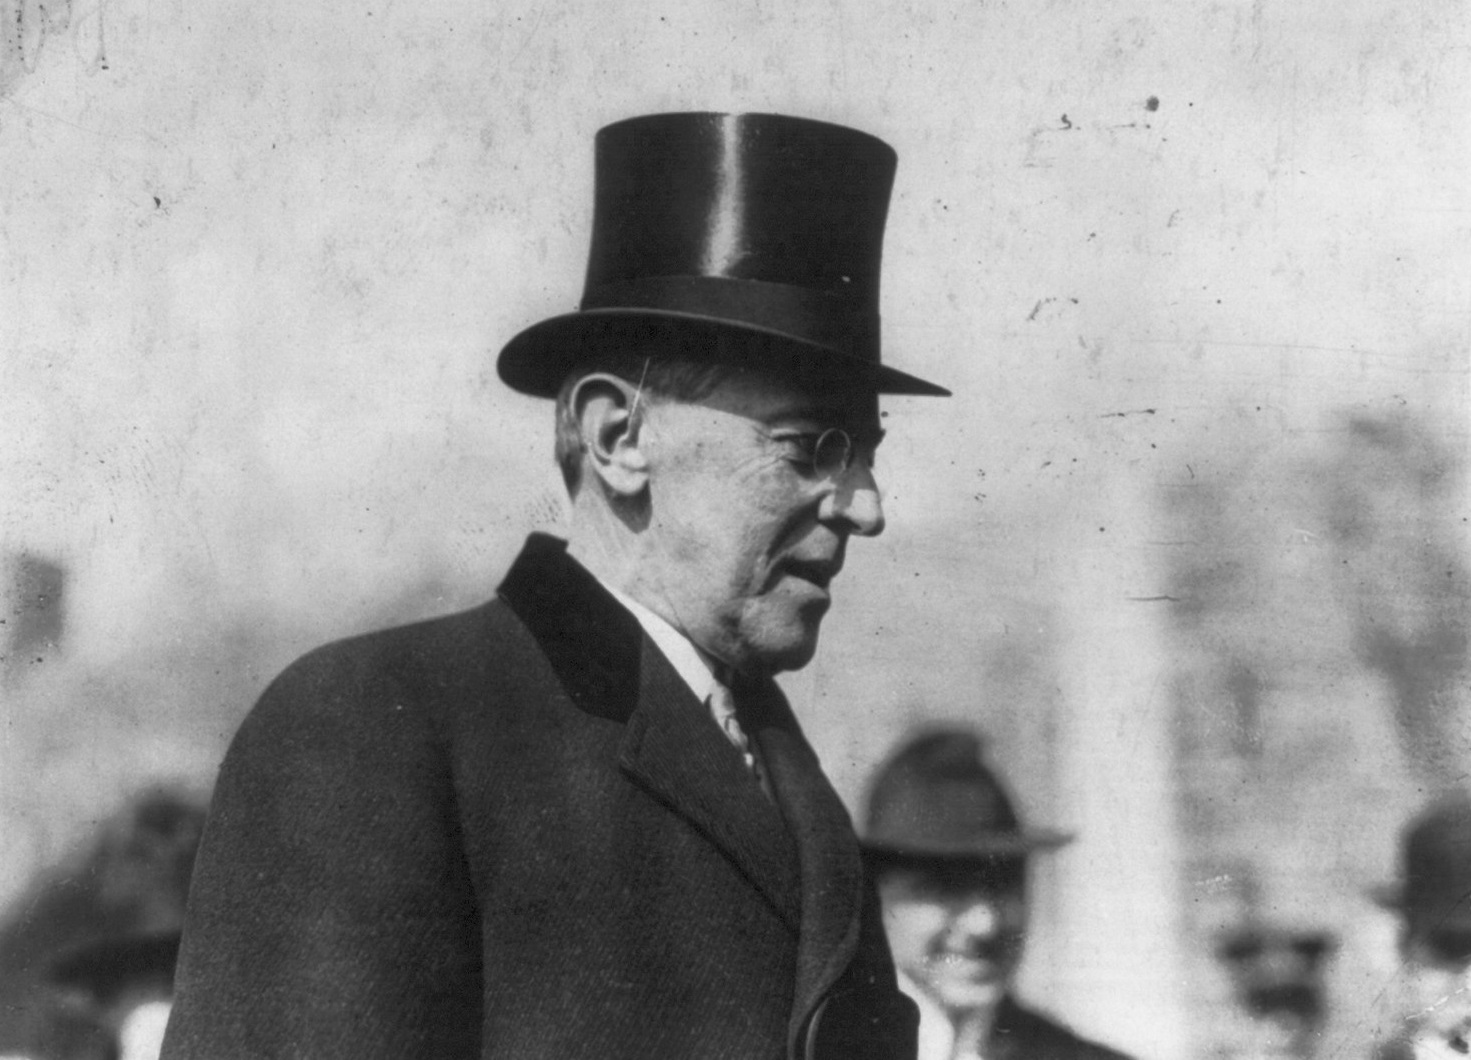 <p>Woodrow Wilson's 1917 speech to Congress declaring democracy's global protection influenced U.S. entry into WWI. His ideals shaped the Fourteen Points and League of Nations, impacting later global organizations like the United Nations for promoting democracy and peace.</p>